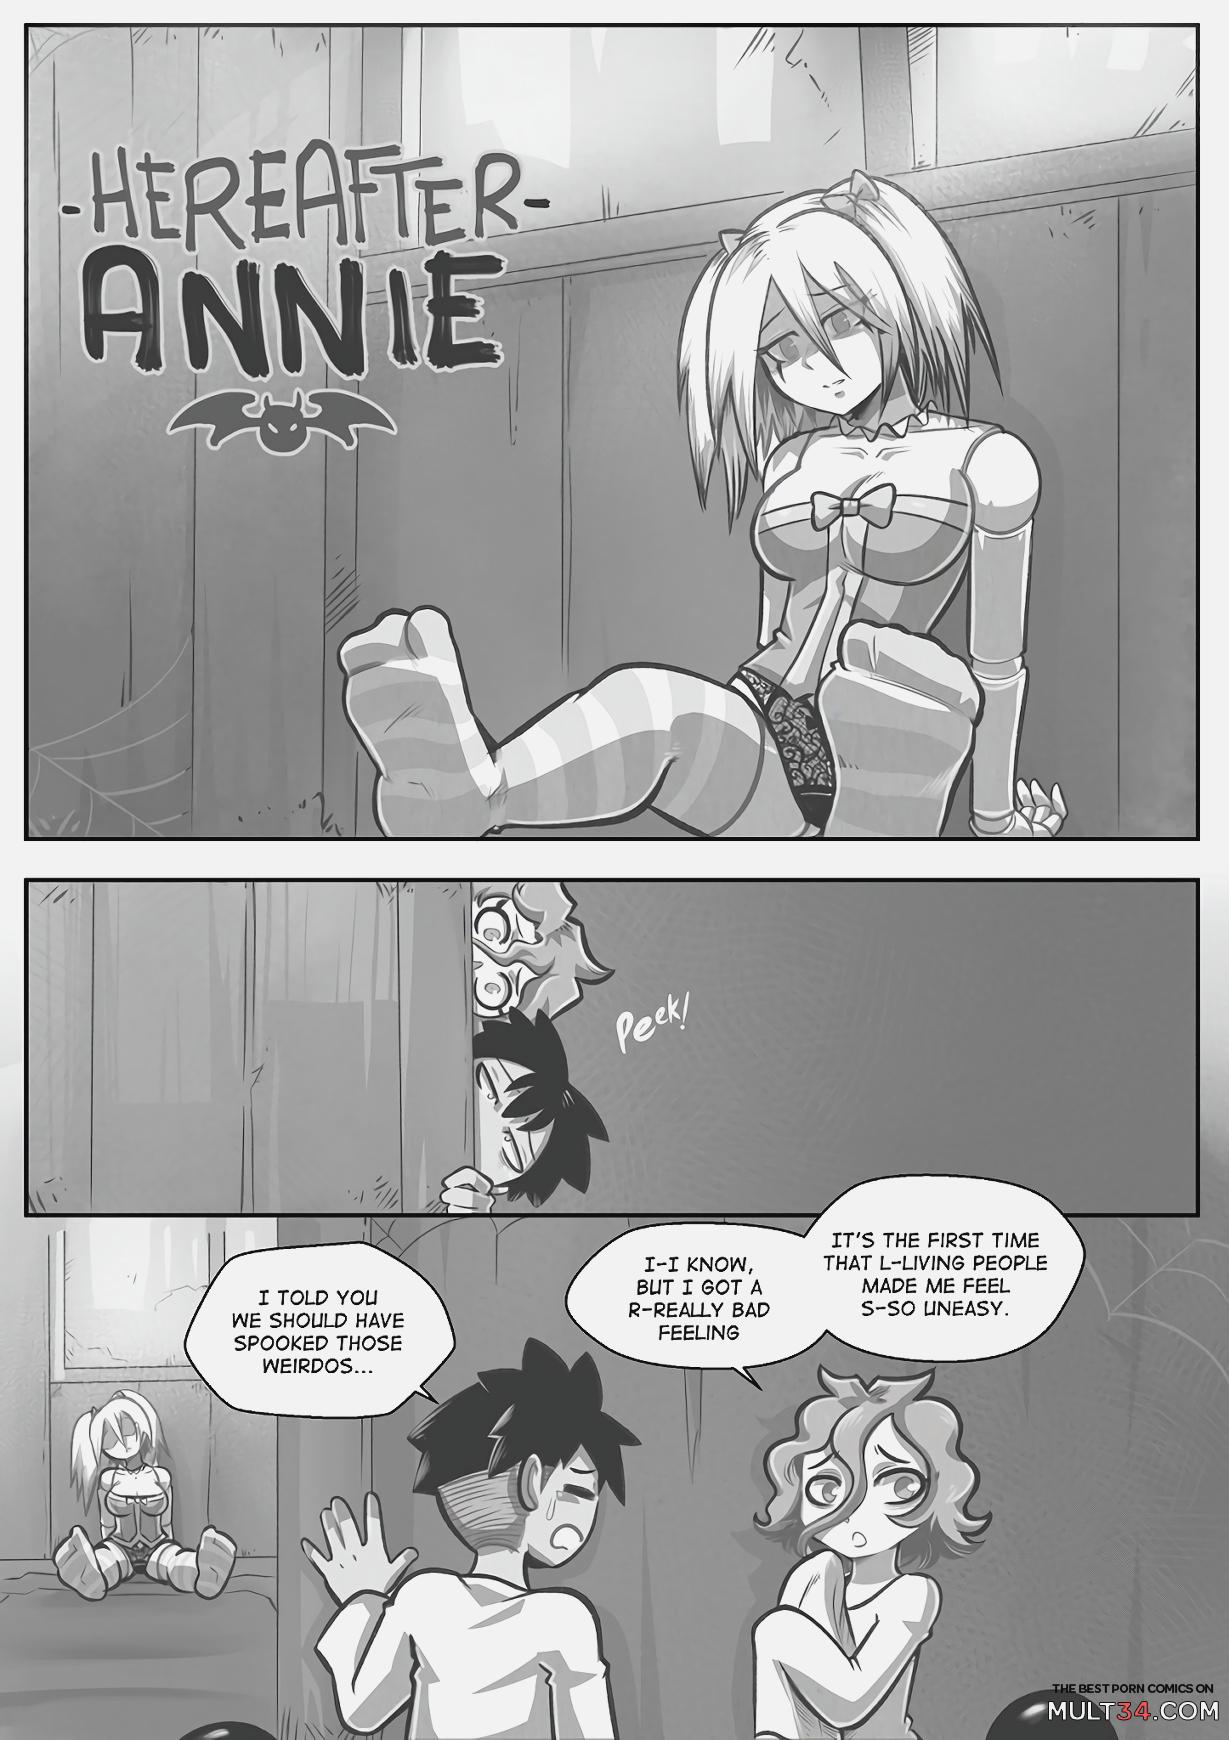 Annie - Tales from the Annieverse - Hereafter Annie porn comic - the best cartoon  porn comics, Rule 34 | MULT34